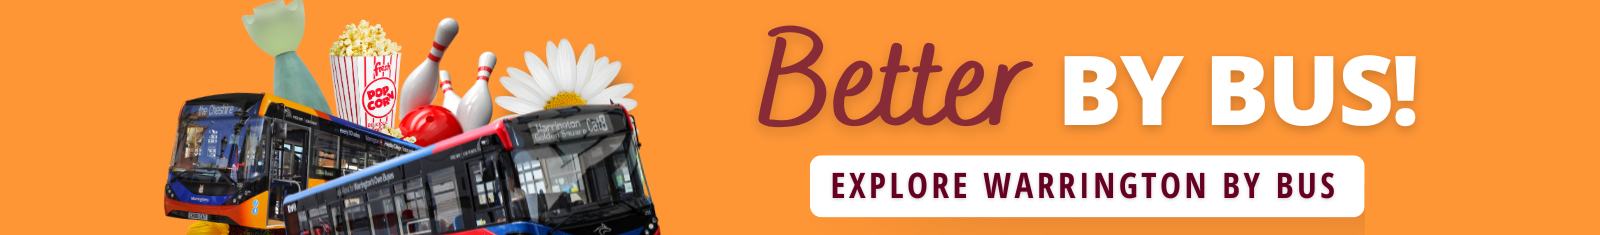 Better By Bus webpage banner